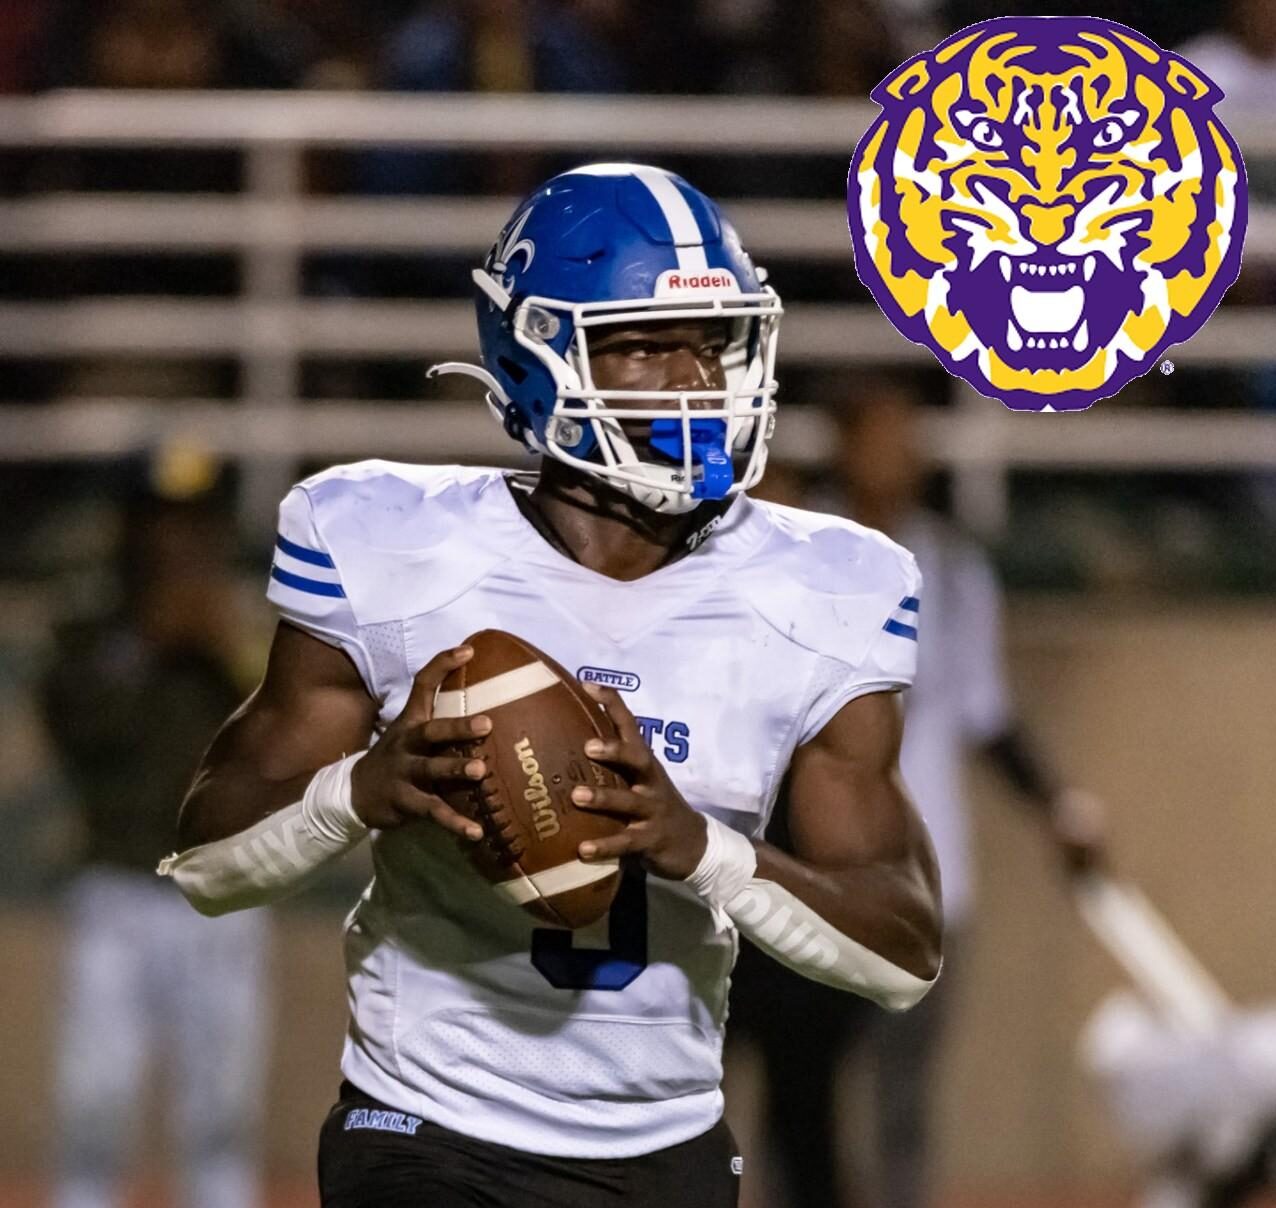 Breaking News: West Feliciana 4 Star Safety Joel Rogers Commits To LSU